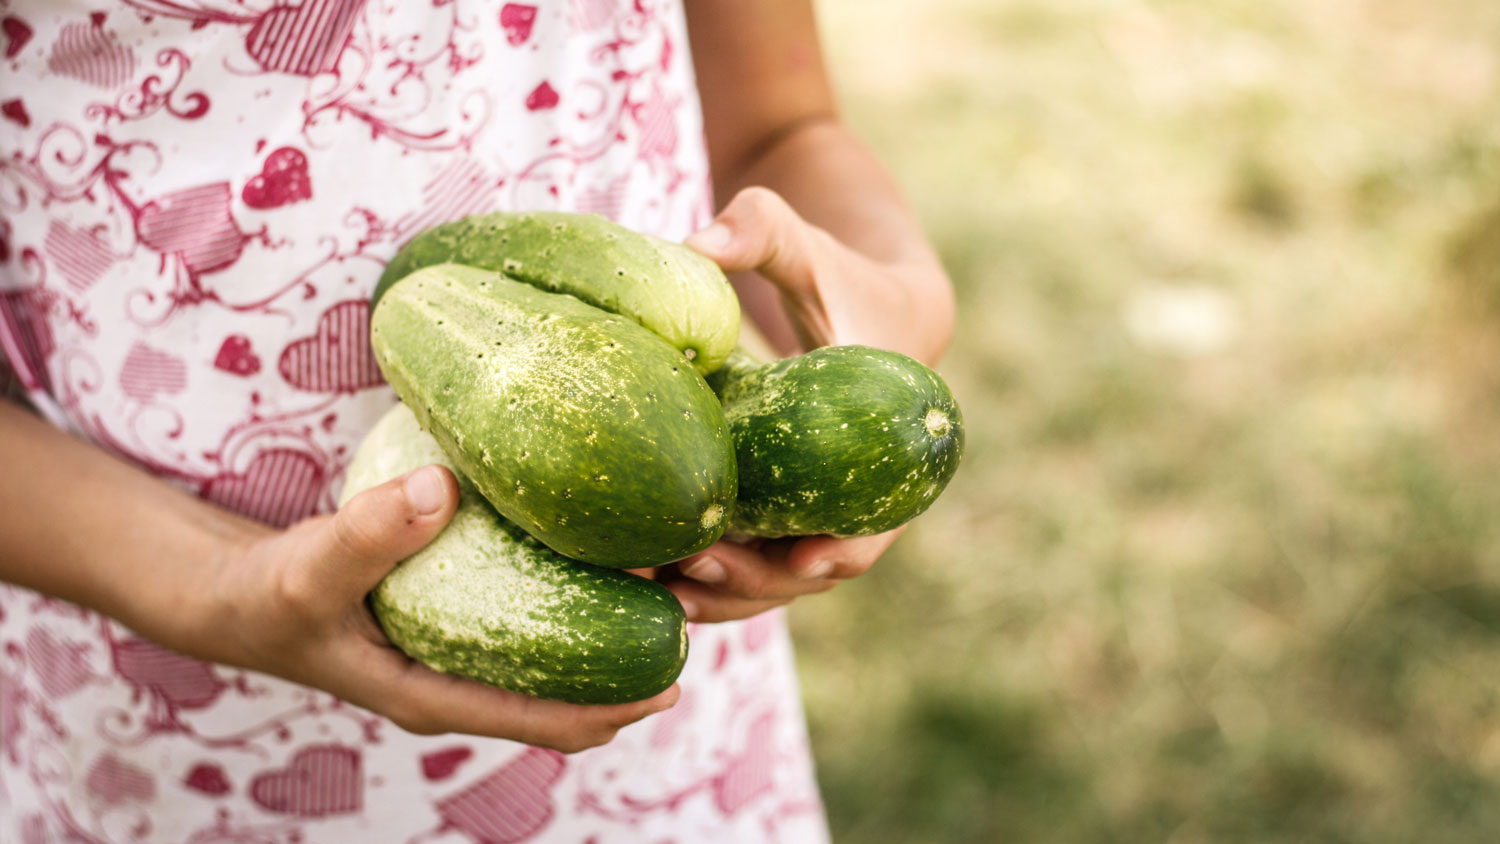 Young girl's hands holding several cucumbers